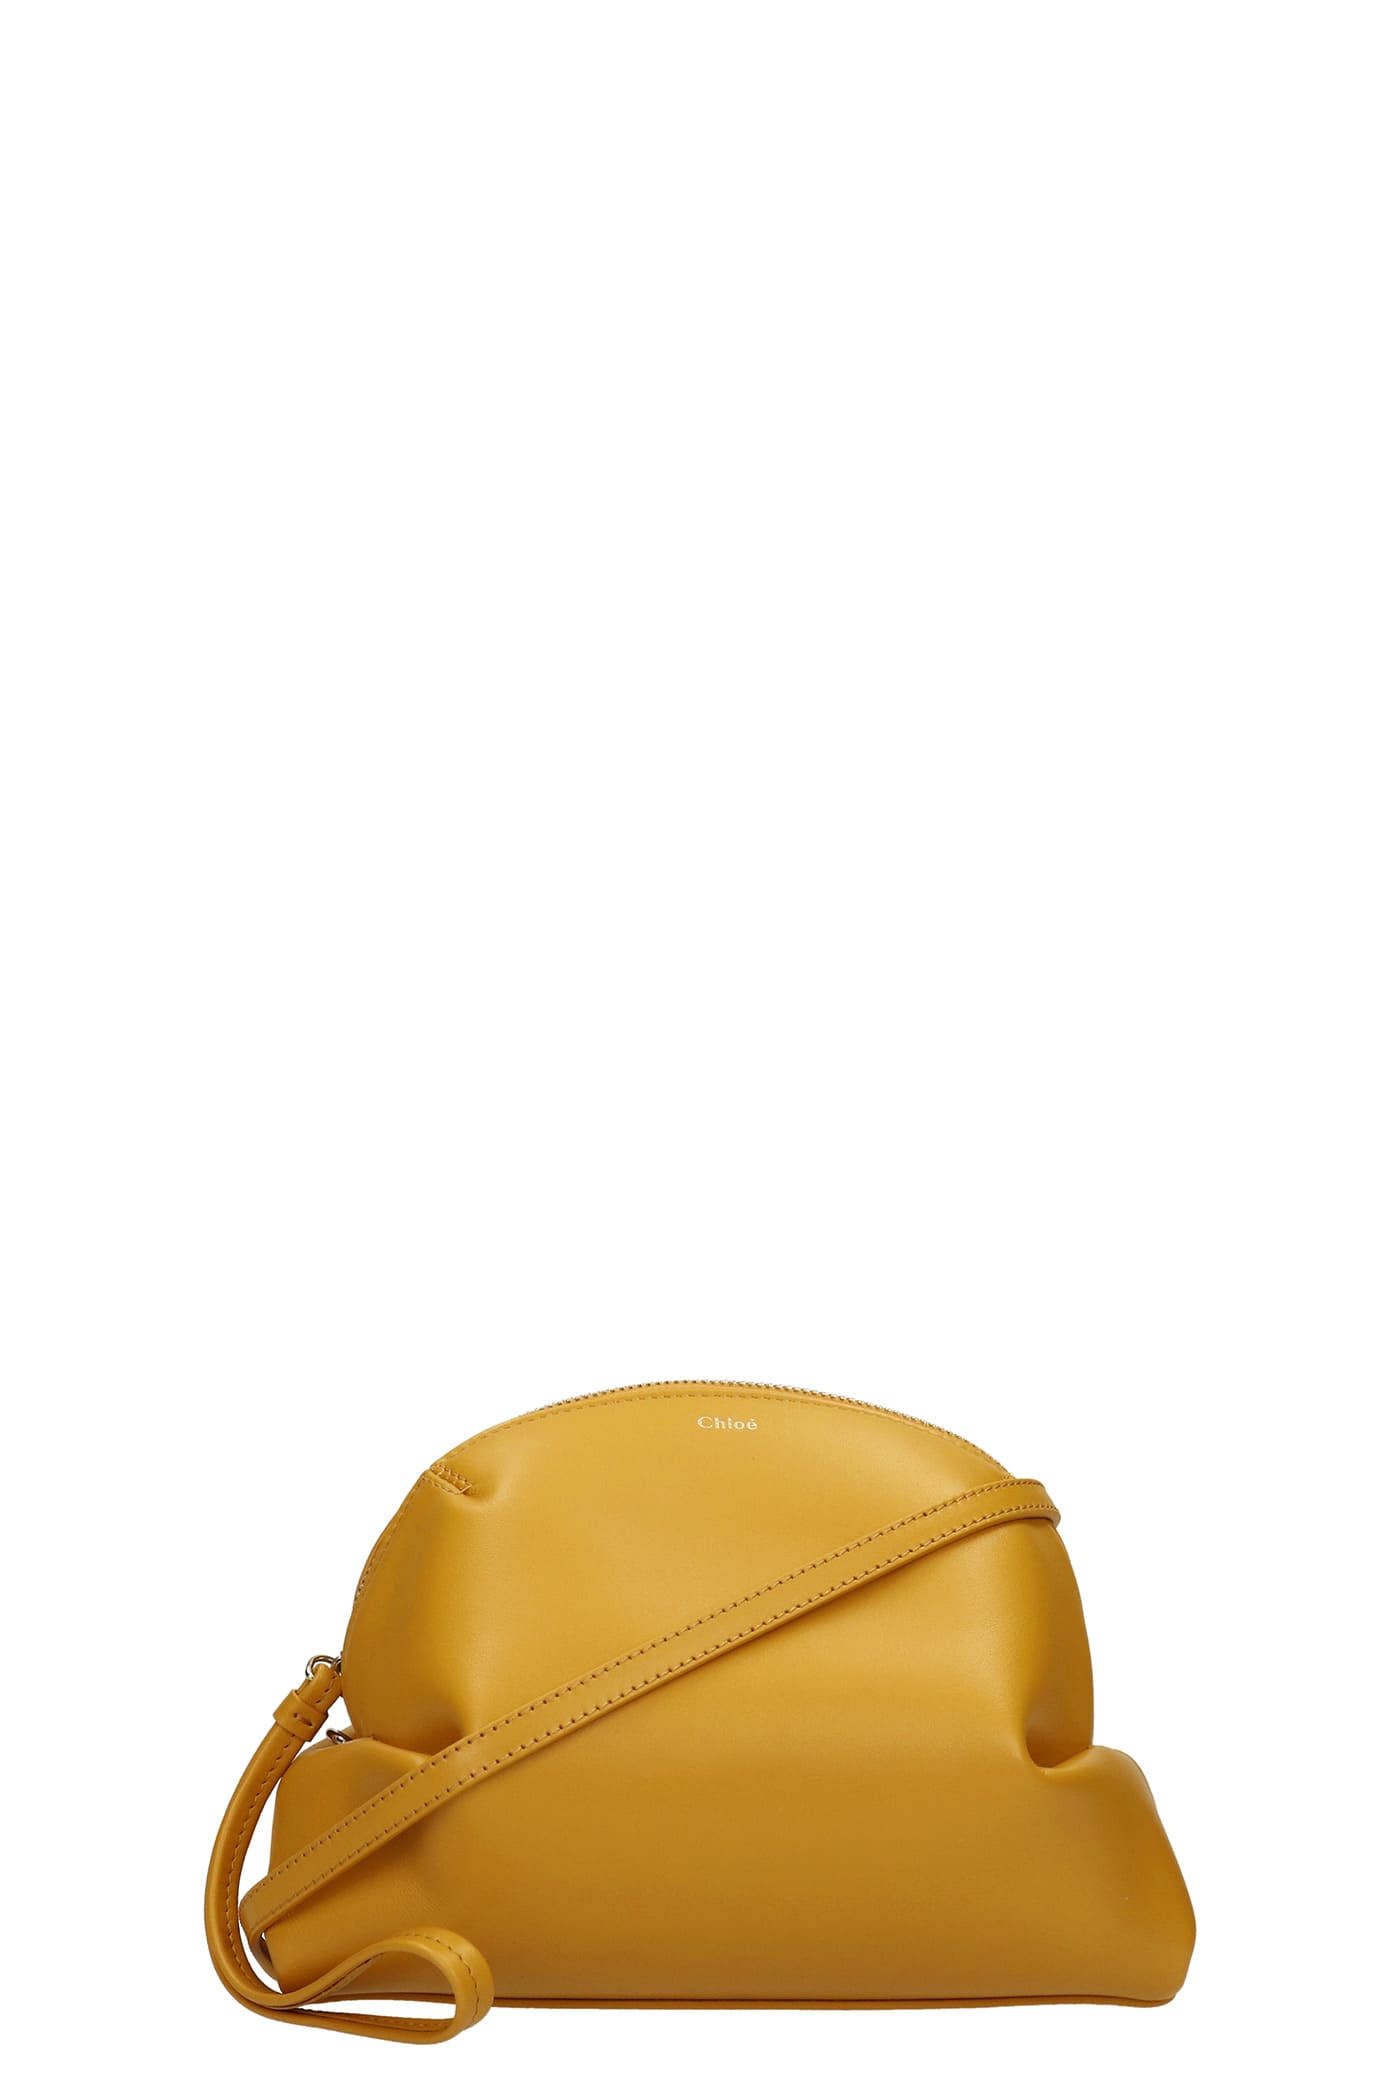 Chloé Judy Shoulder Bag In Yellow Leather | ModeSens